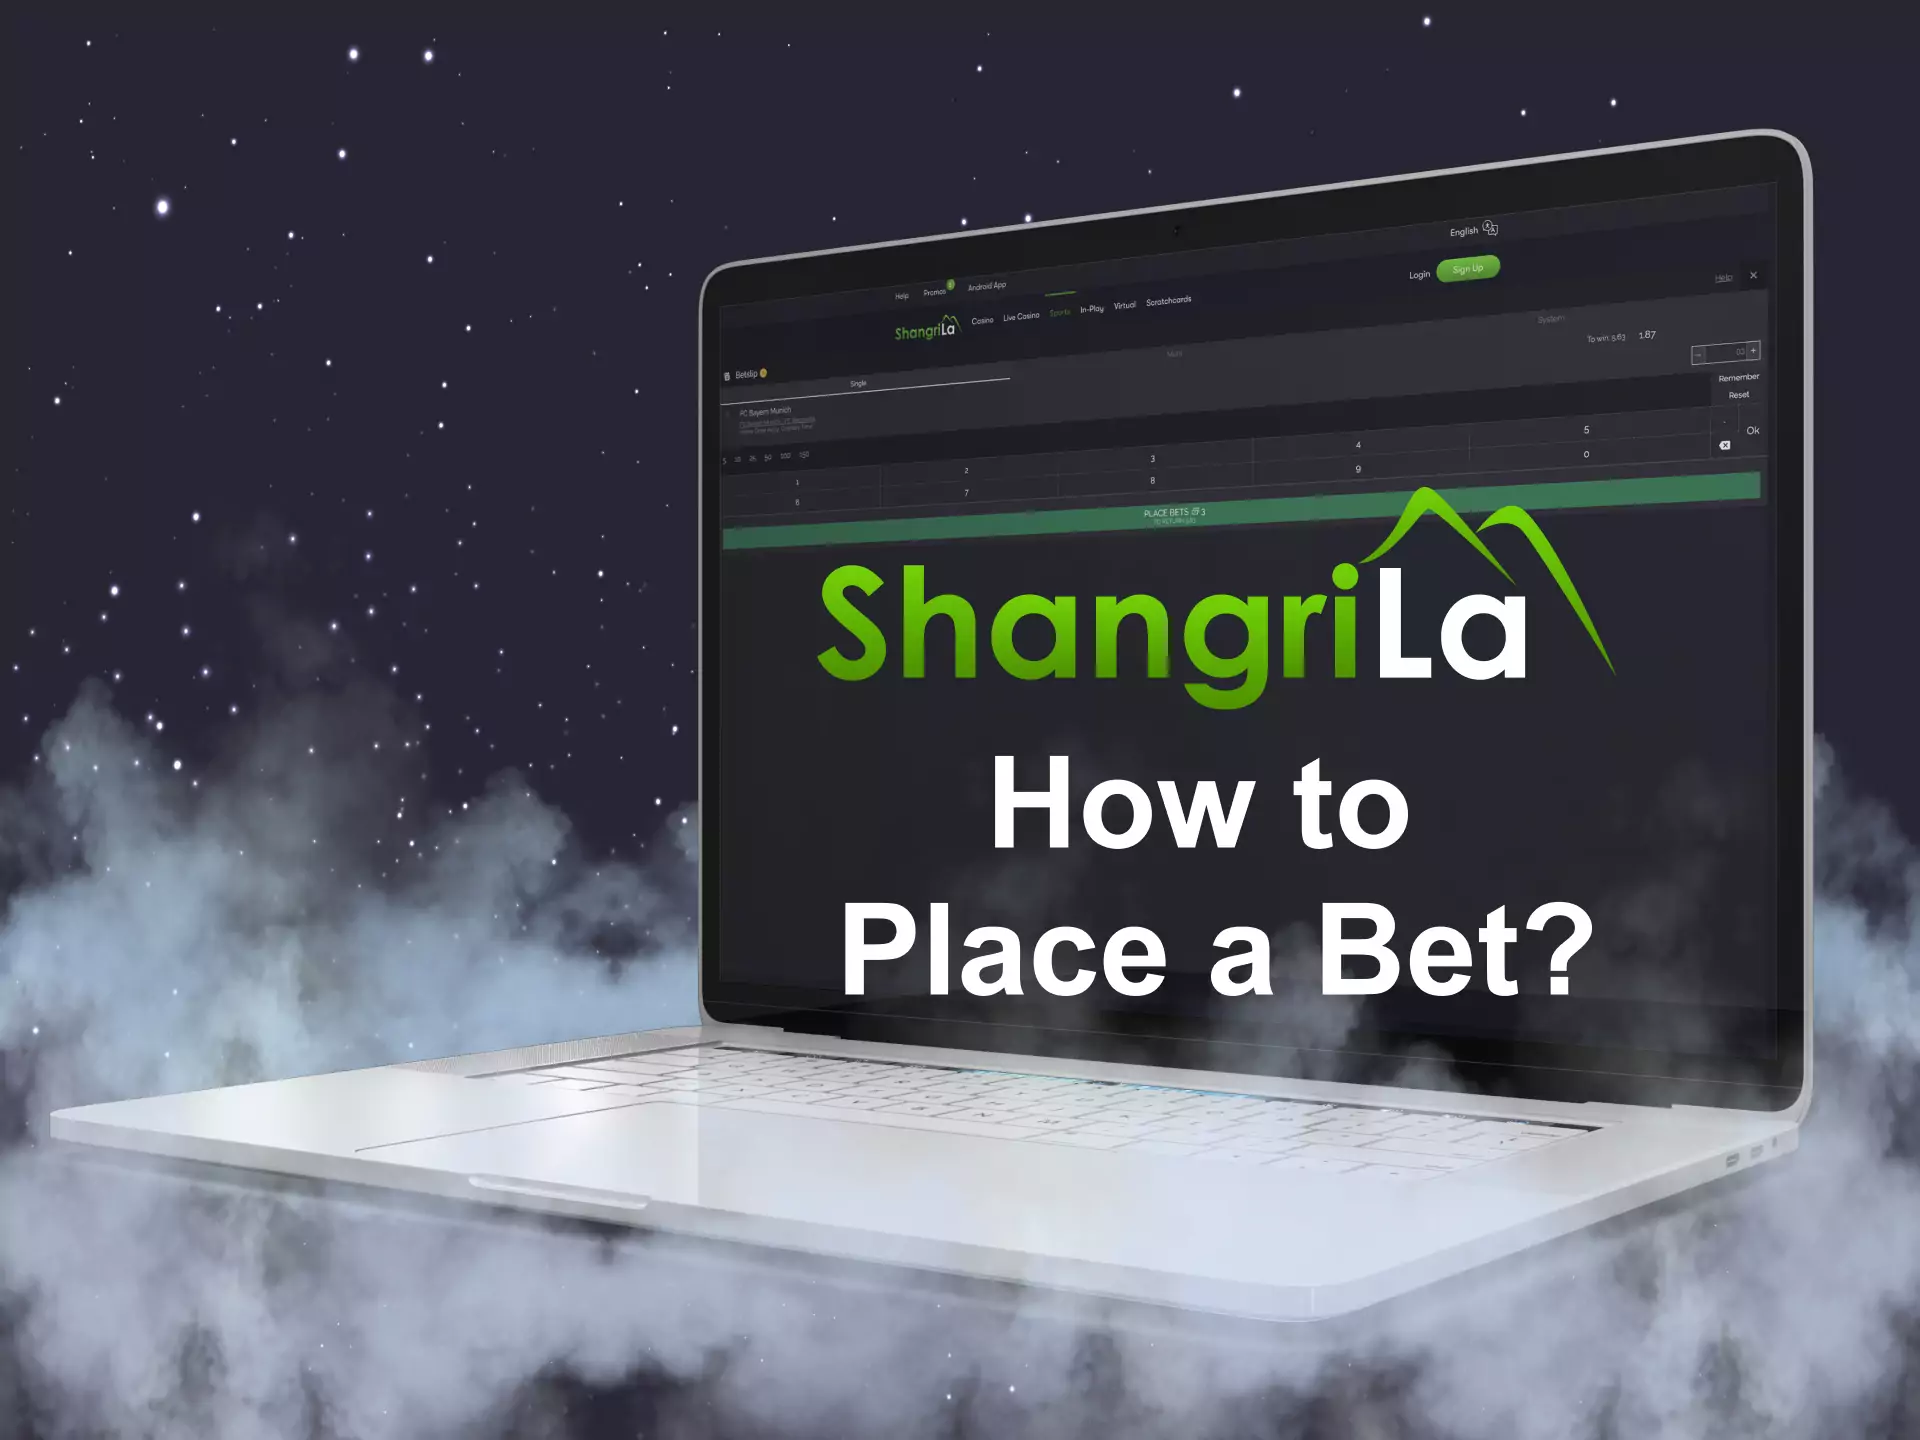 Pick the match and make a prediction to place a bet on Shangri La.